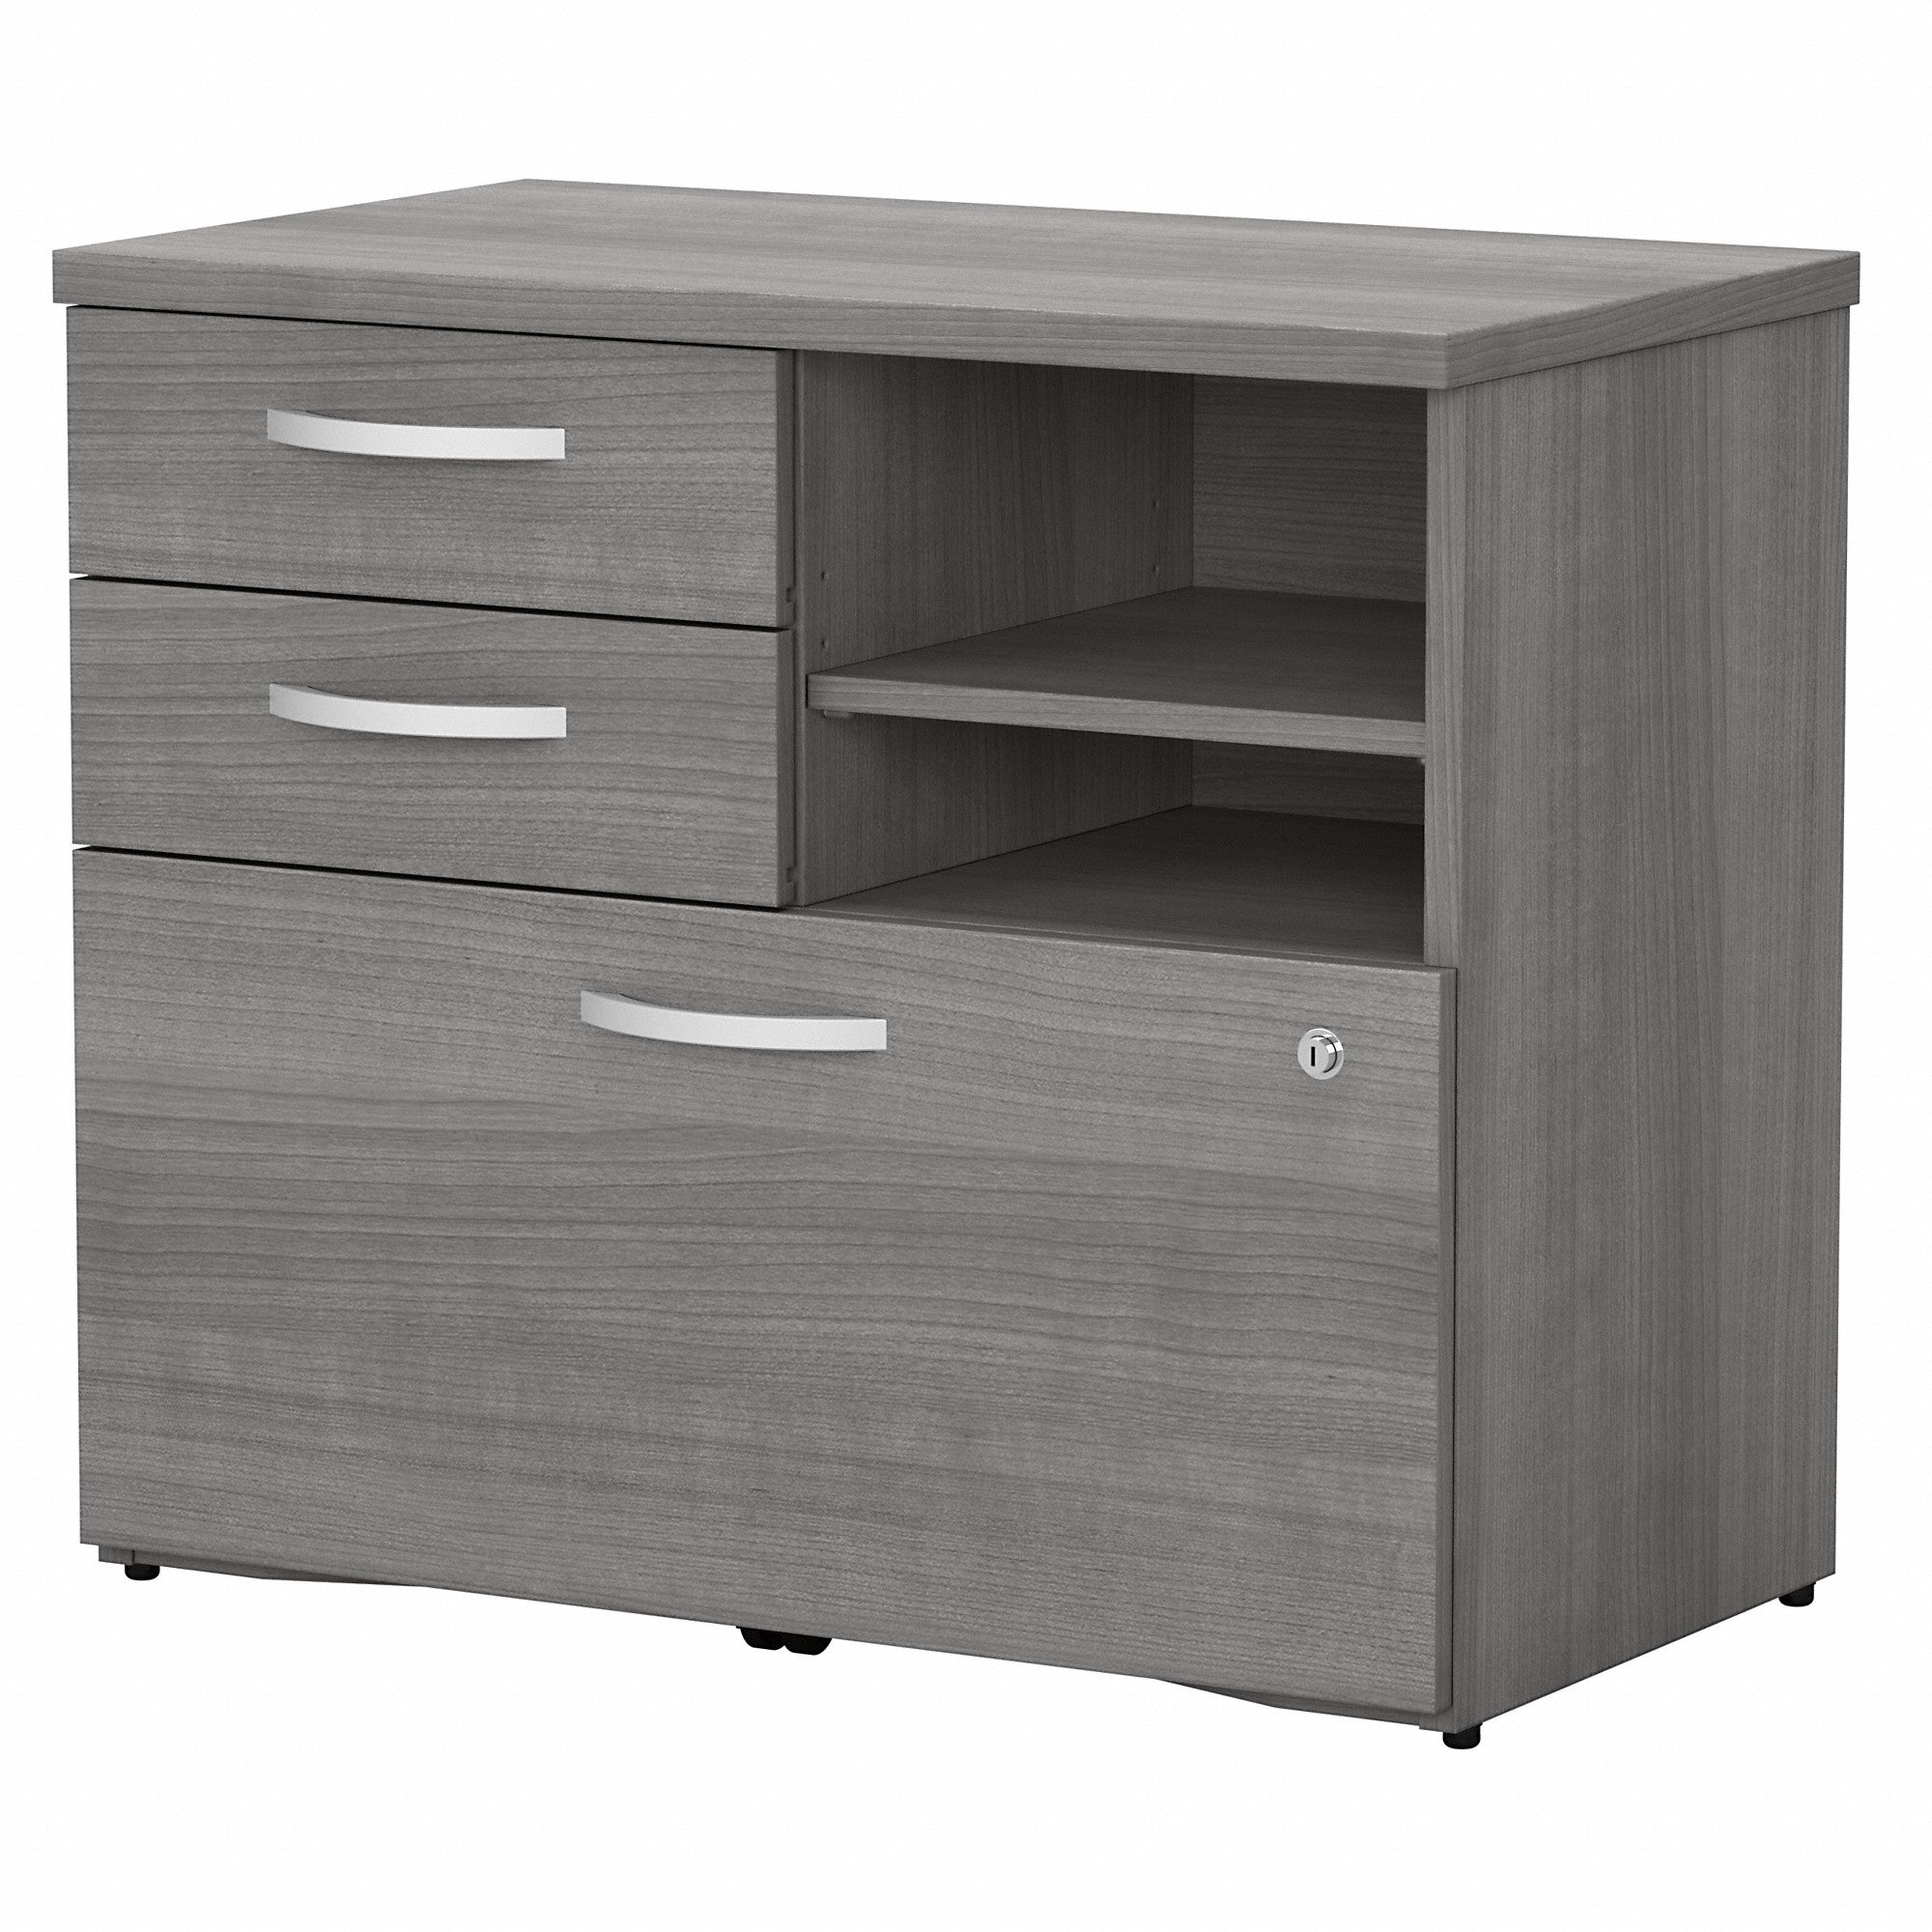 Bush Business Furniture Studio C Office Storage Cabinet with Drawers and Shelves | Platinum Gray/Platinum Gray